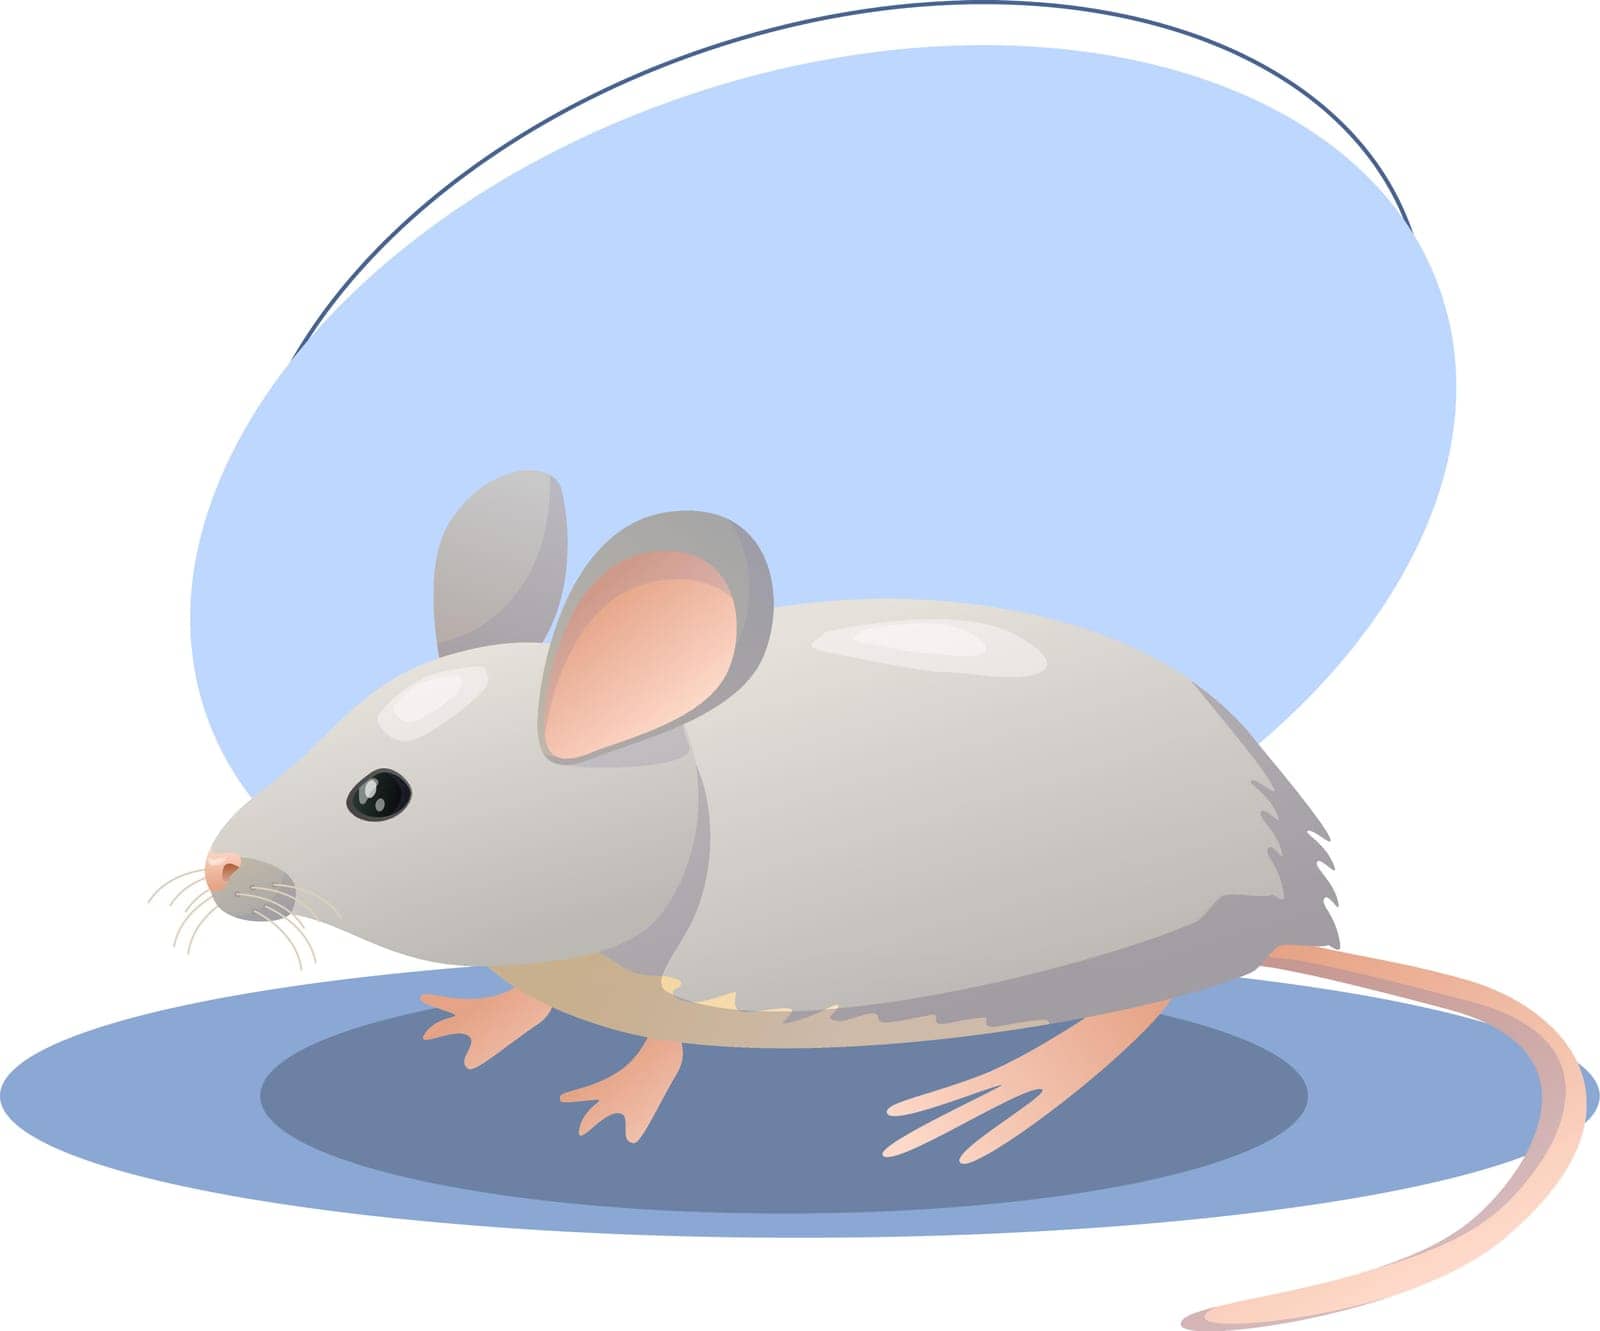 Mouse illustration. Animal, ears, tail, nose. Editable vector graphic design. by simakovavector